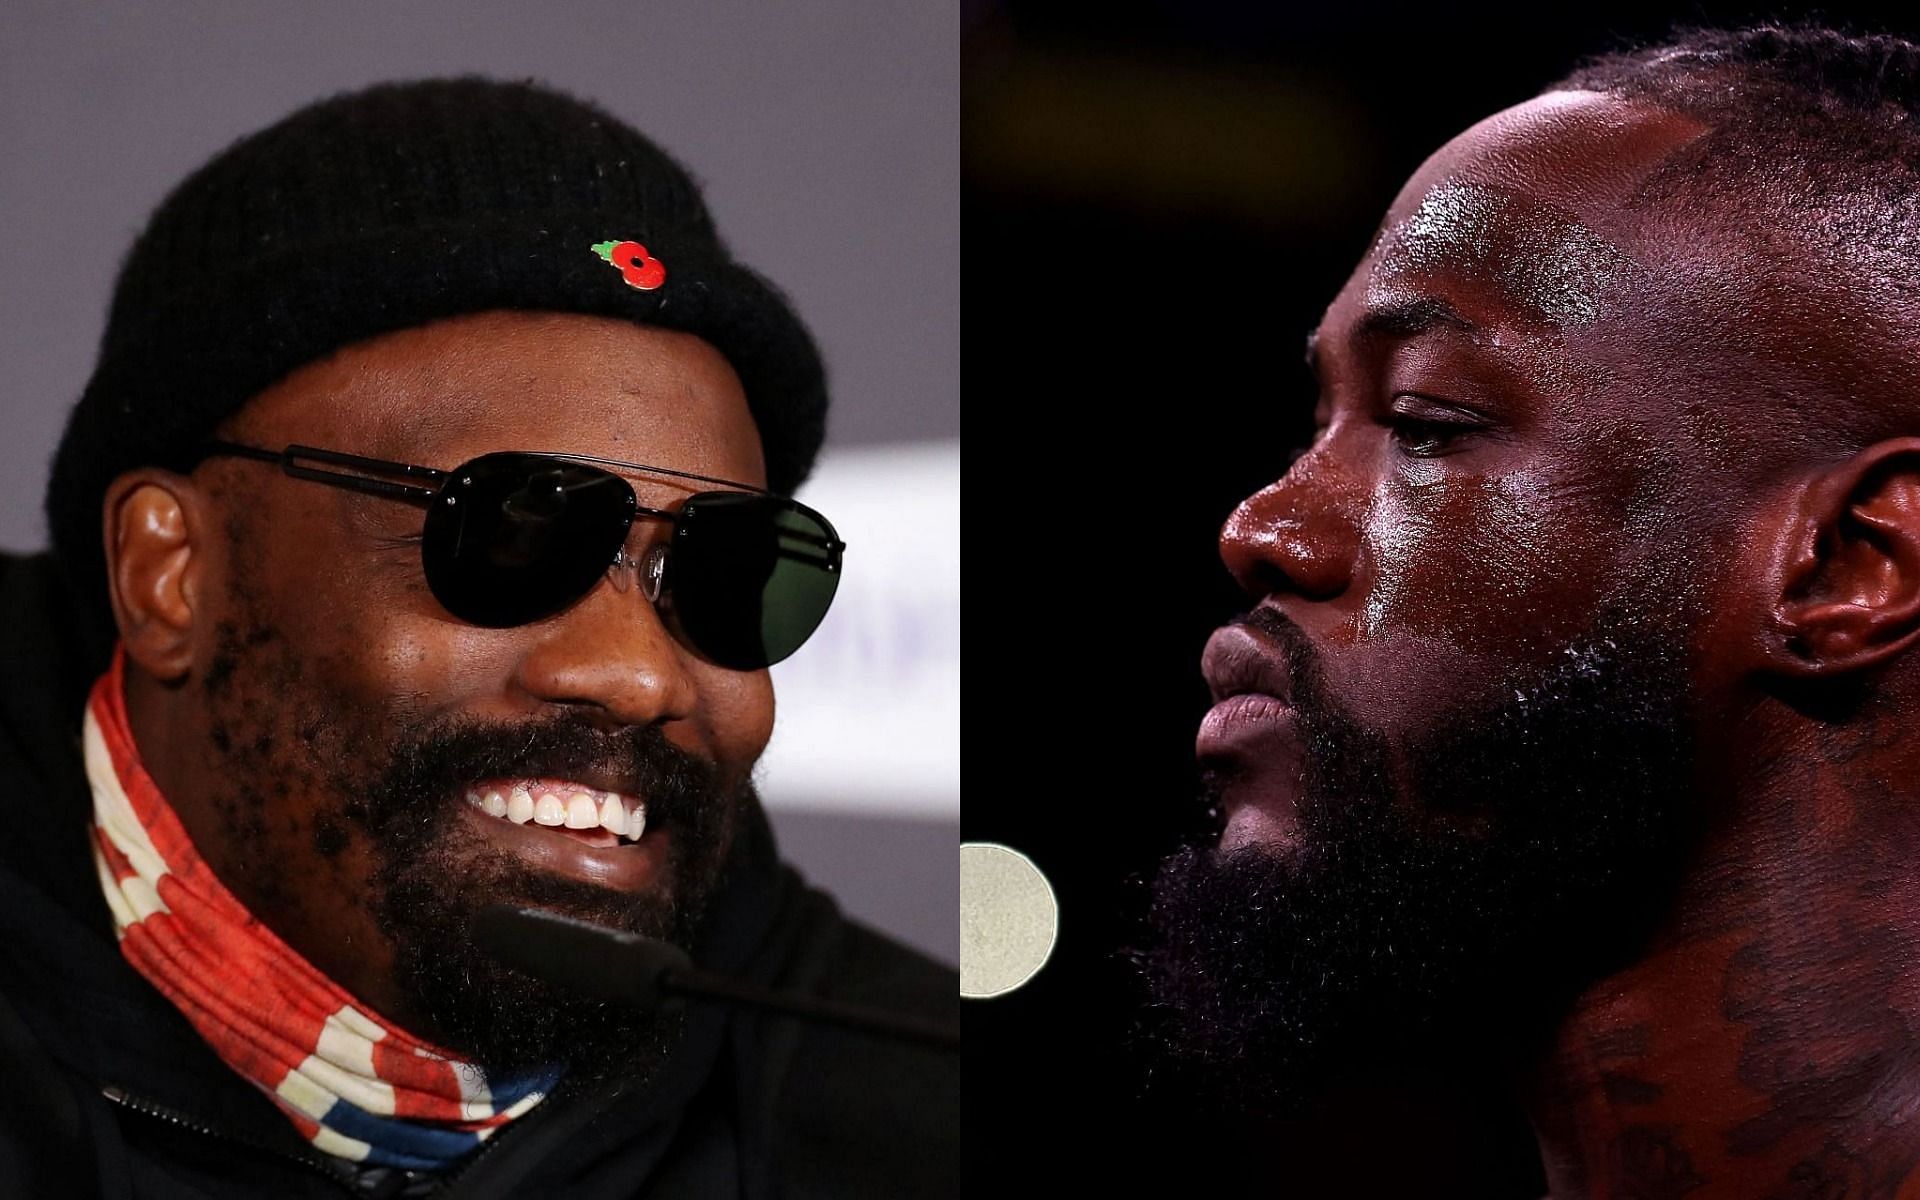 Dereck Chisora (left) has called out Deontay Wilder (right) for a fight next/